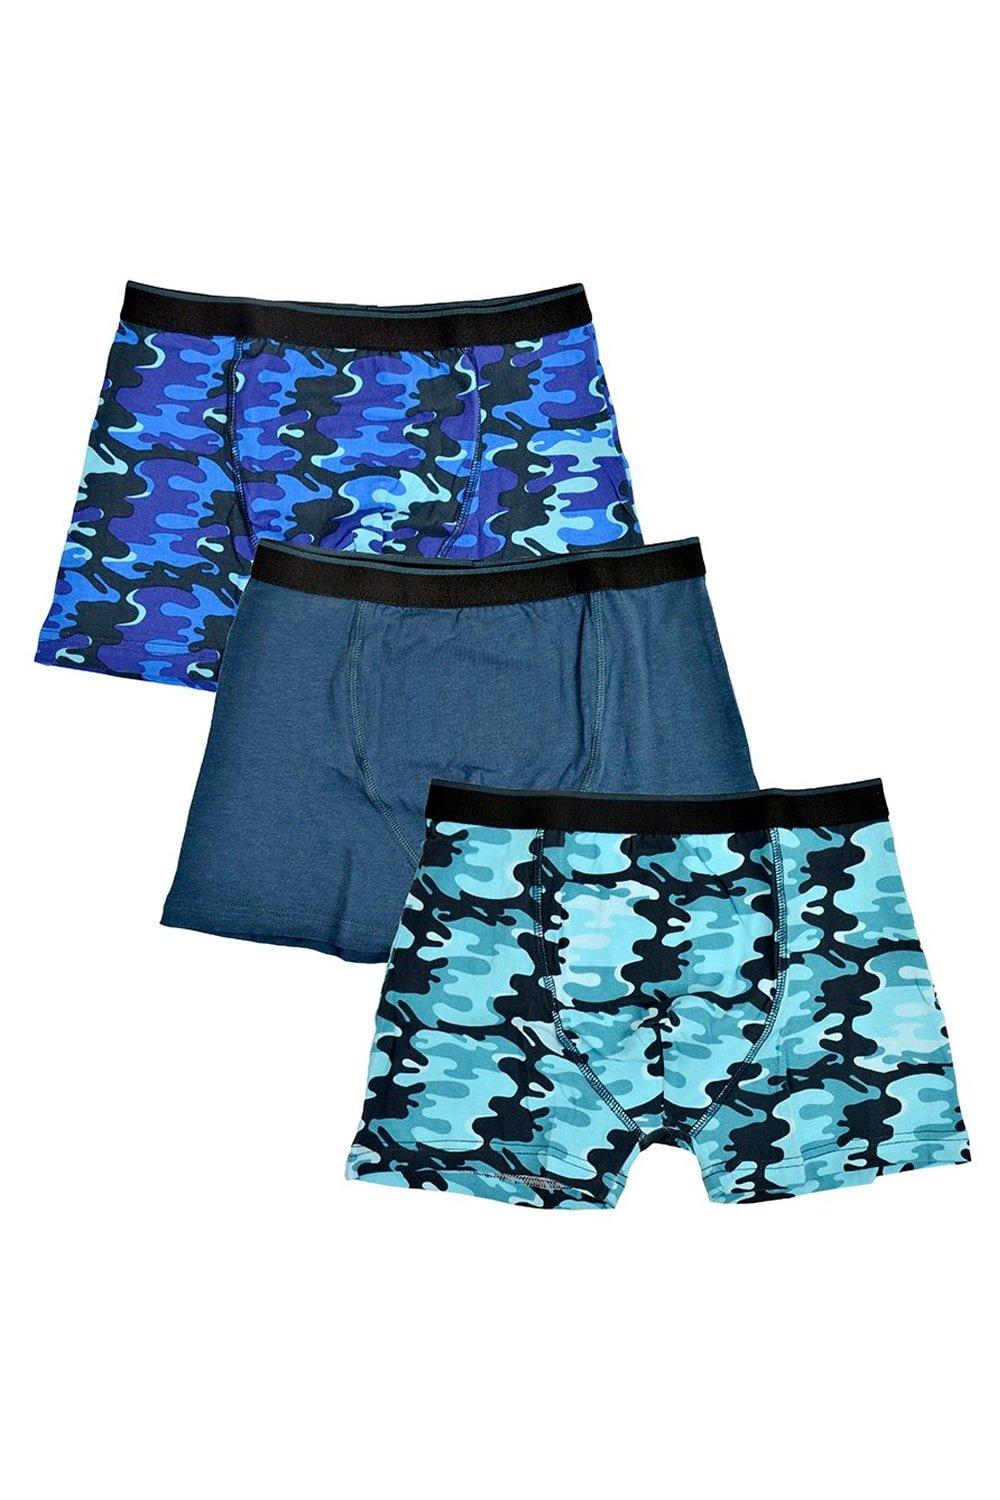 Camo Boxers (Pack Of 3)